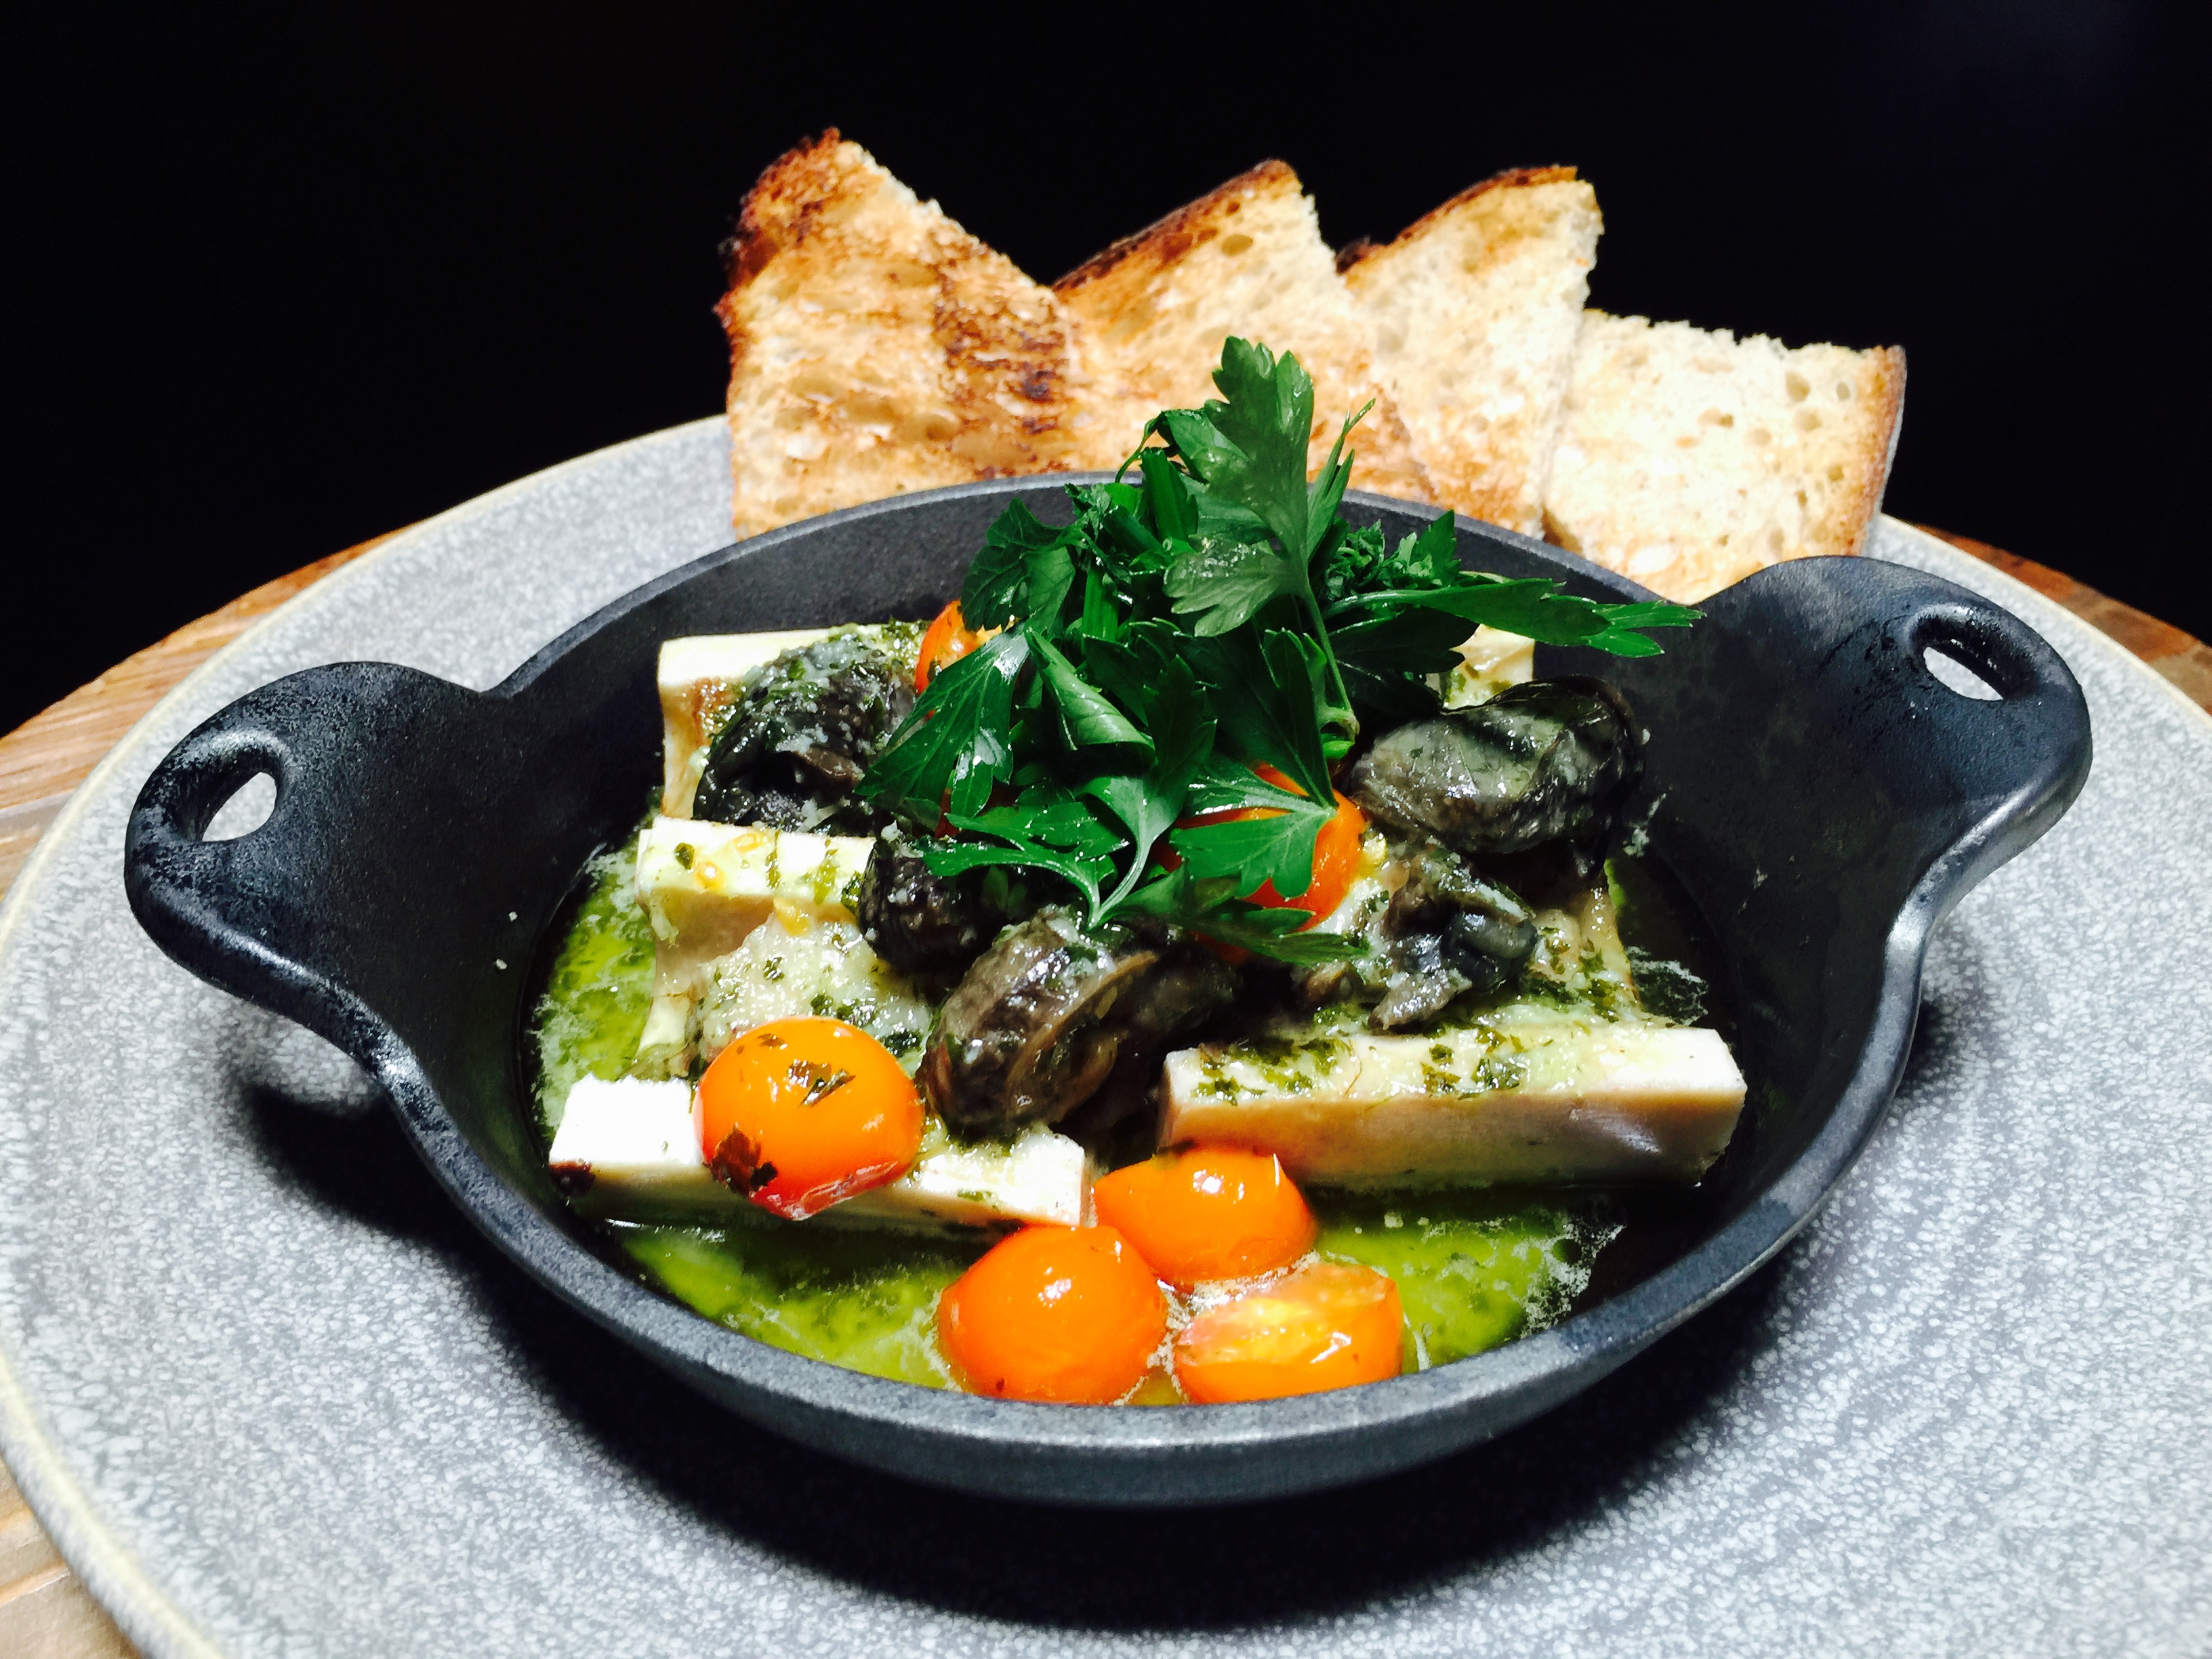 Chef Hiro Sone's Roasted Bone Marrow with Escargot in Burgundy Butter with Herb Salad